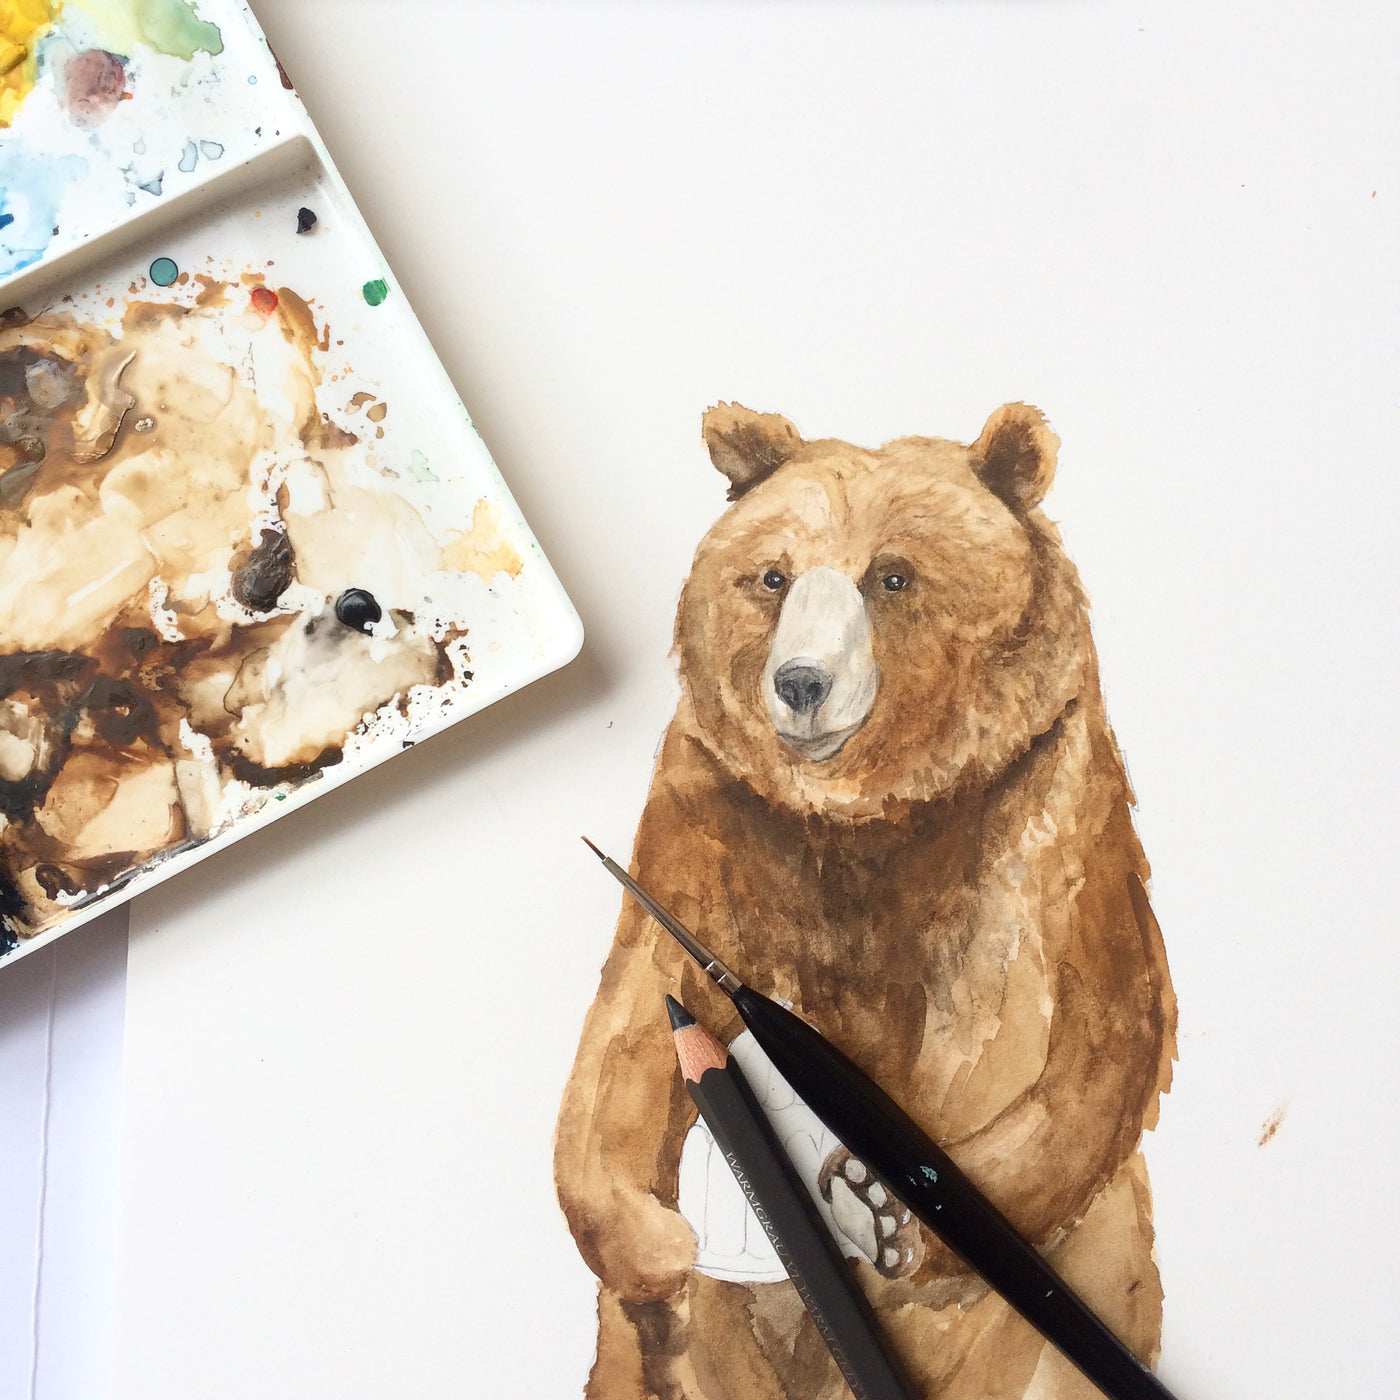 Work in progress bear illustration with brush and pencil